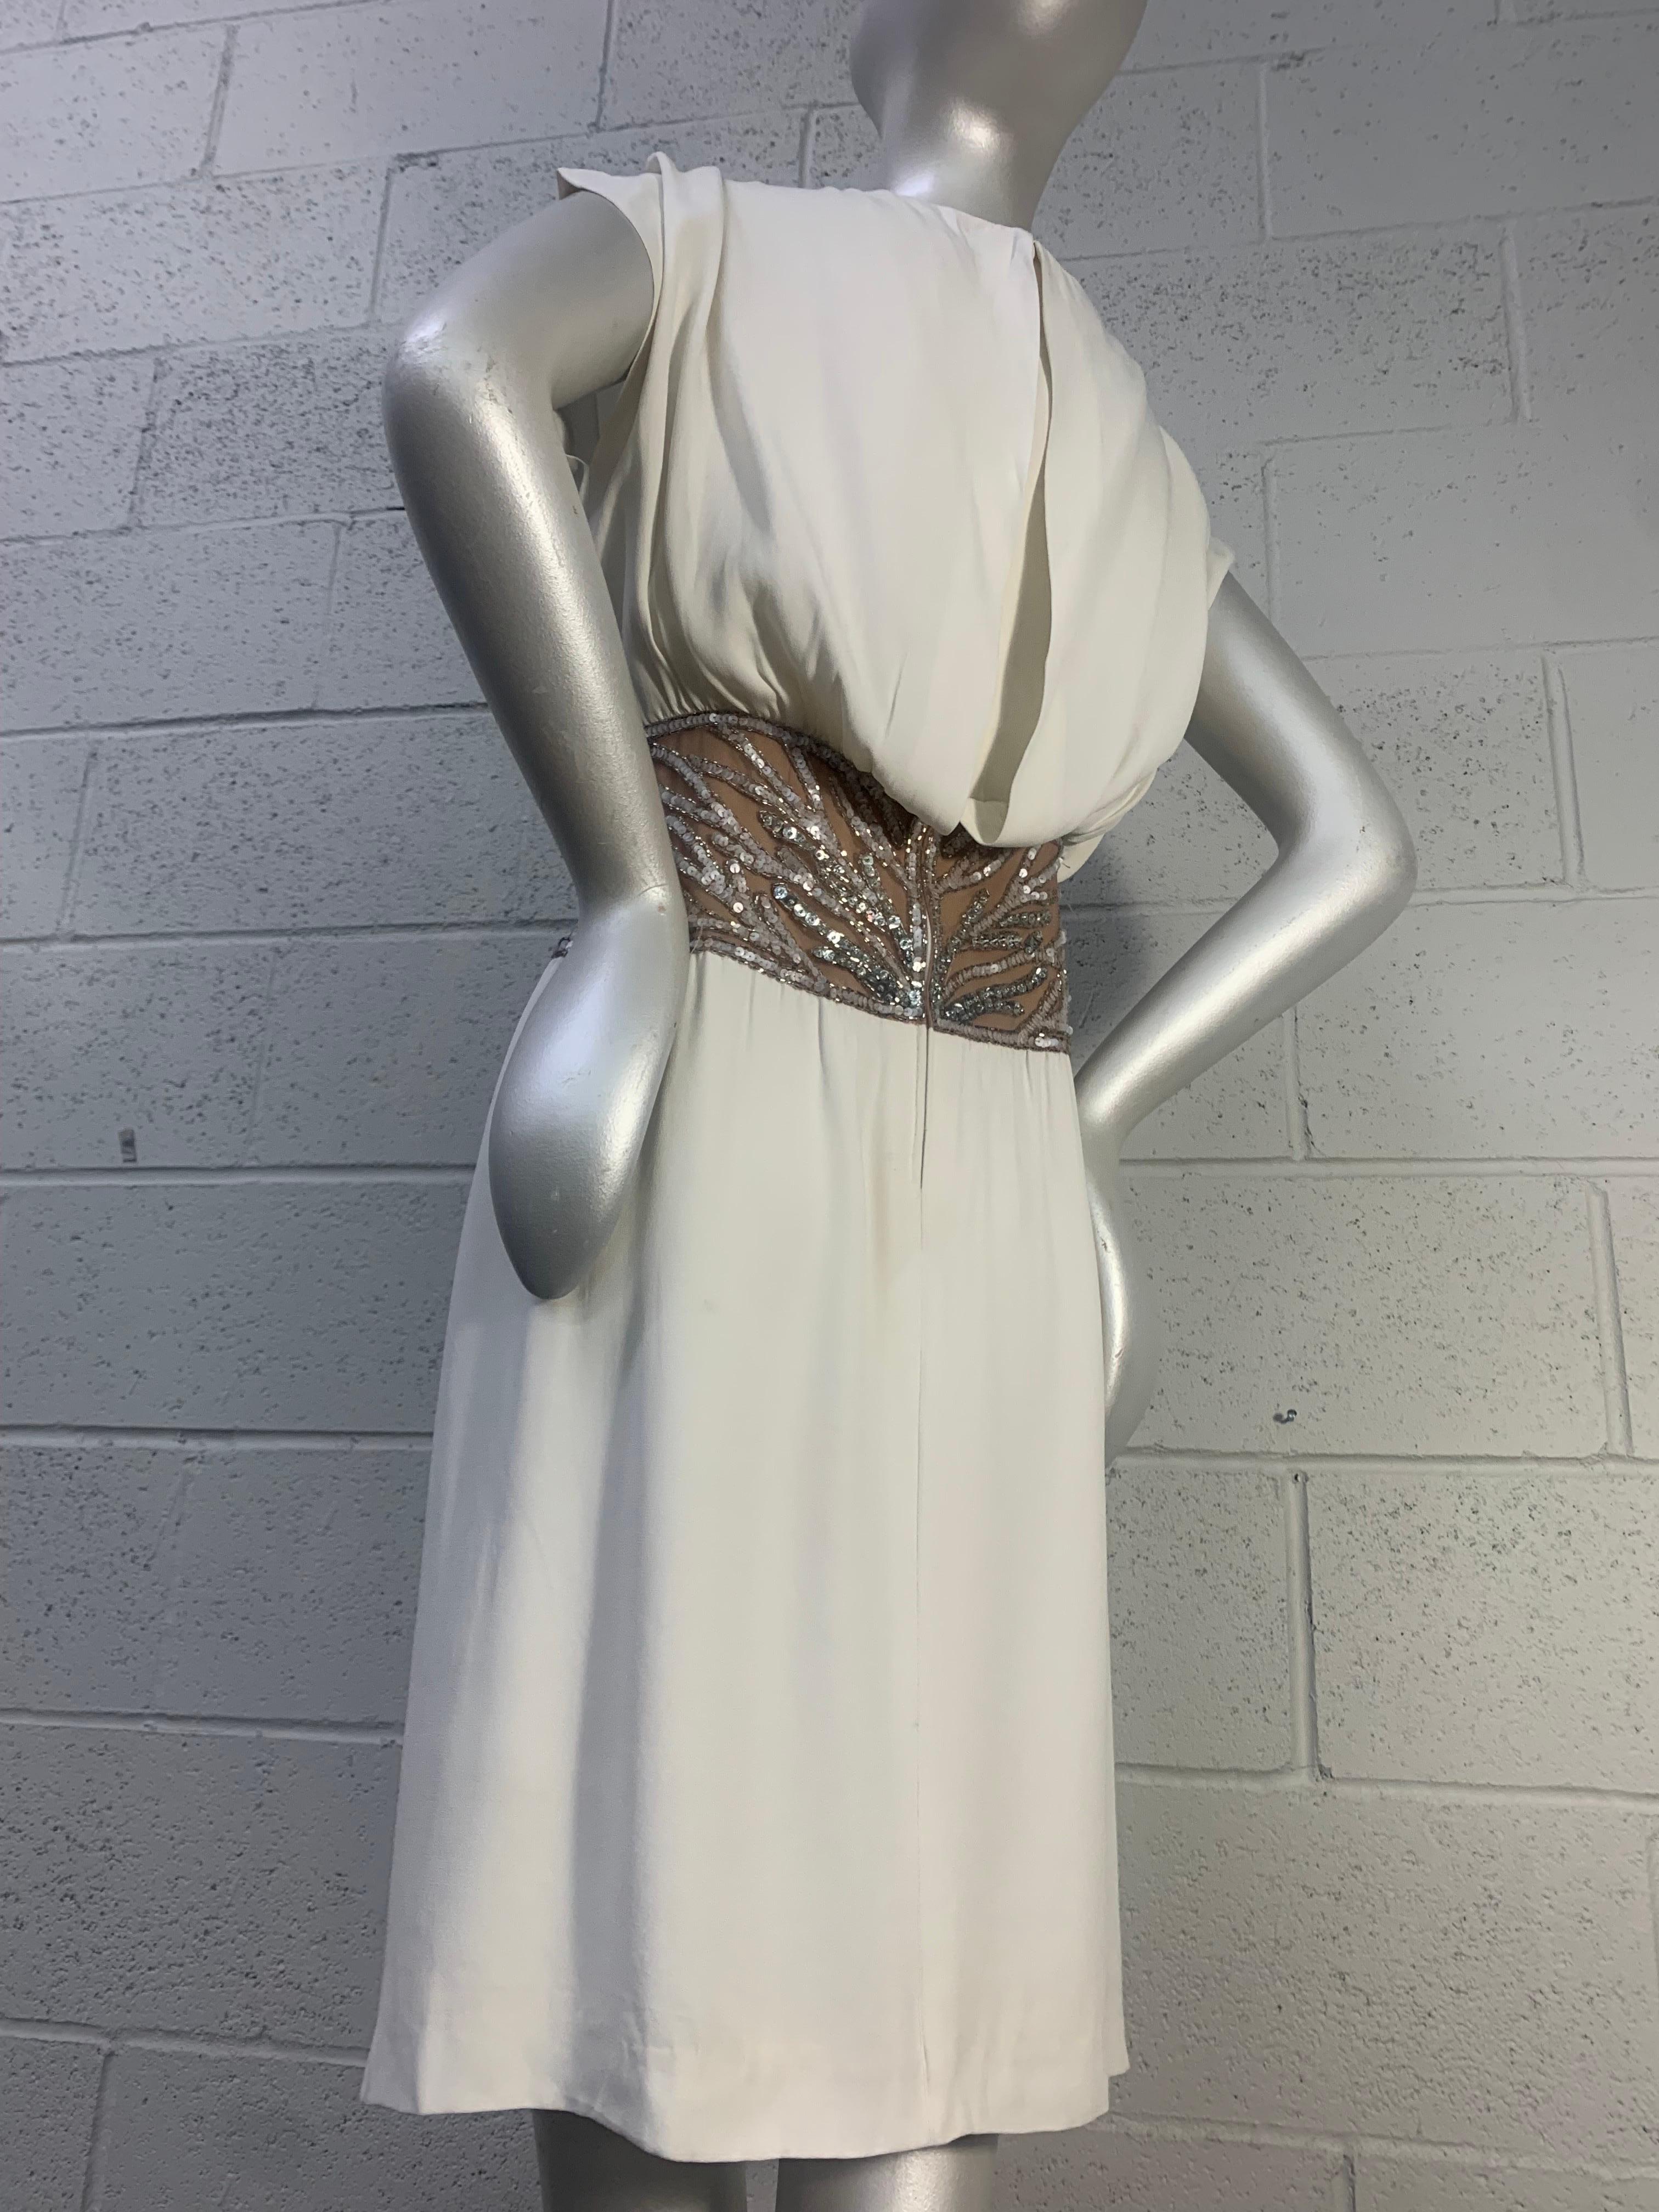 1980s Bob Mackie White Silk Crepe Cocktail Dress w Sheer Beaded Waist Panel In Good Condition For Sale In Gresham, OR